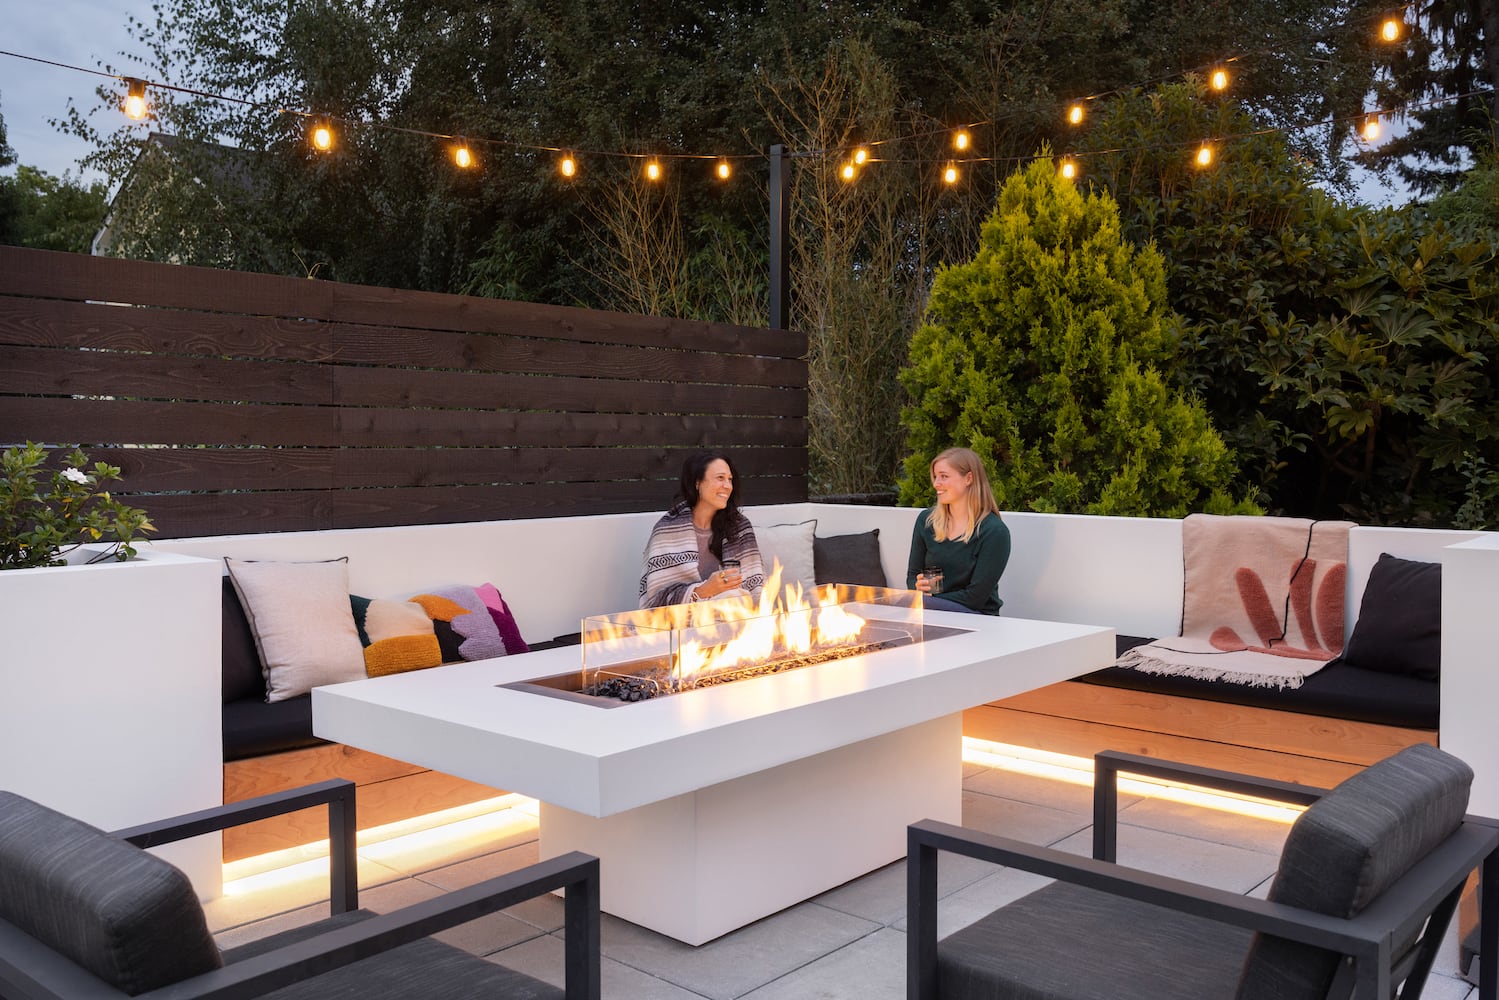 Interior designers enjoy an outdoor fireplace with string lights, custom couch